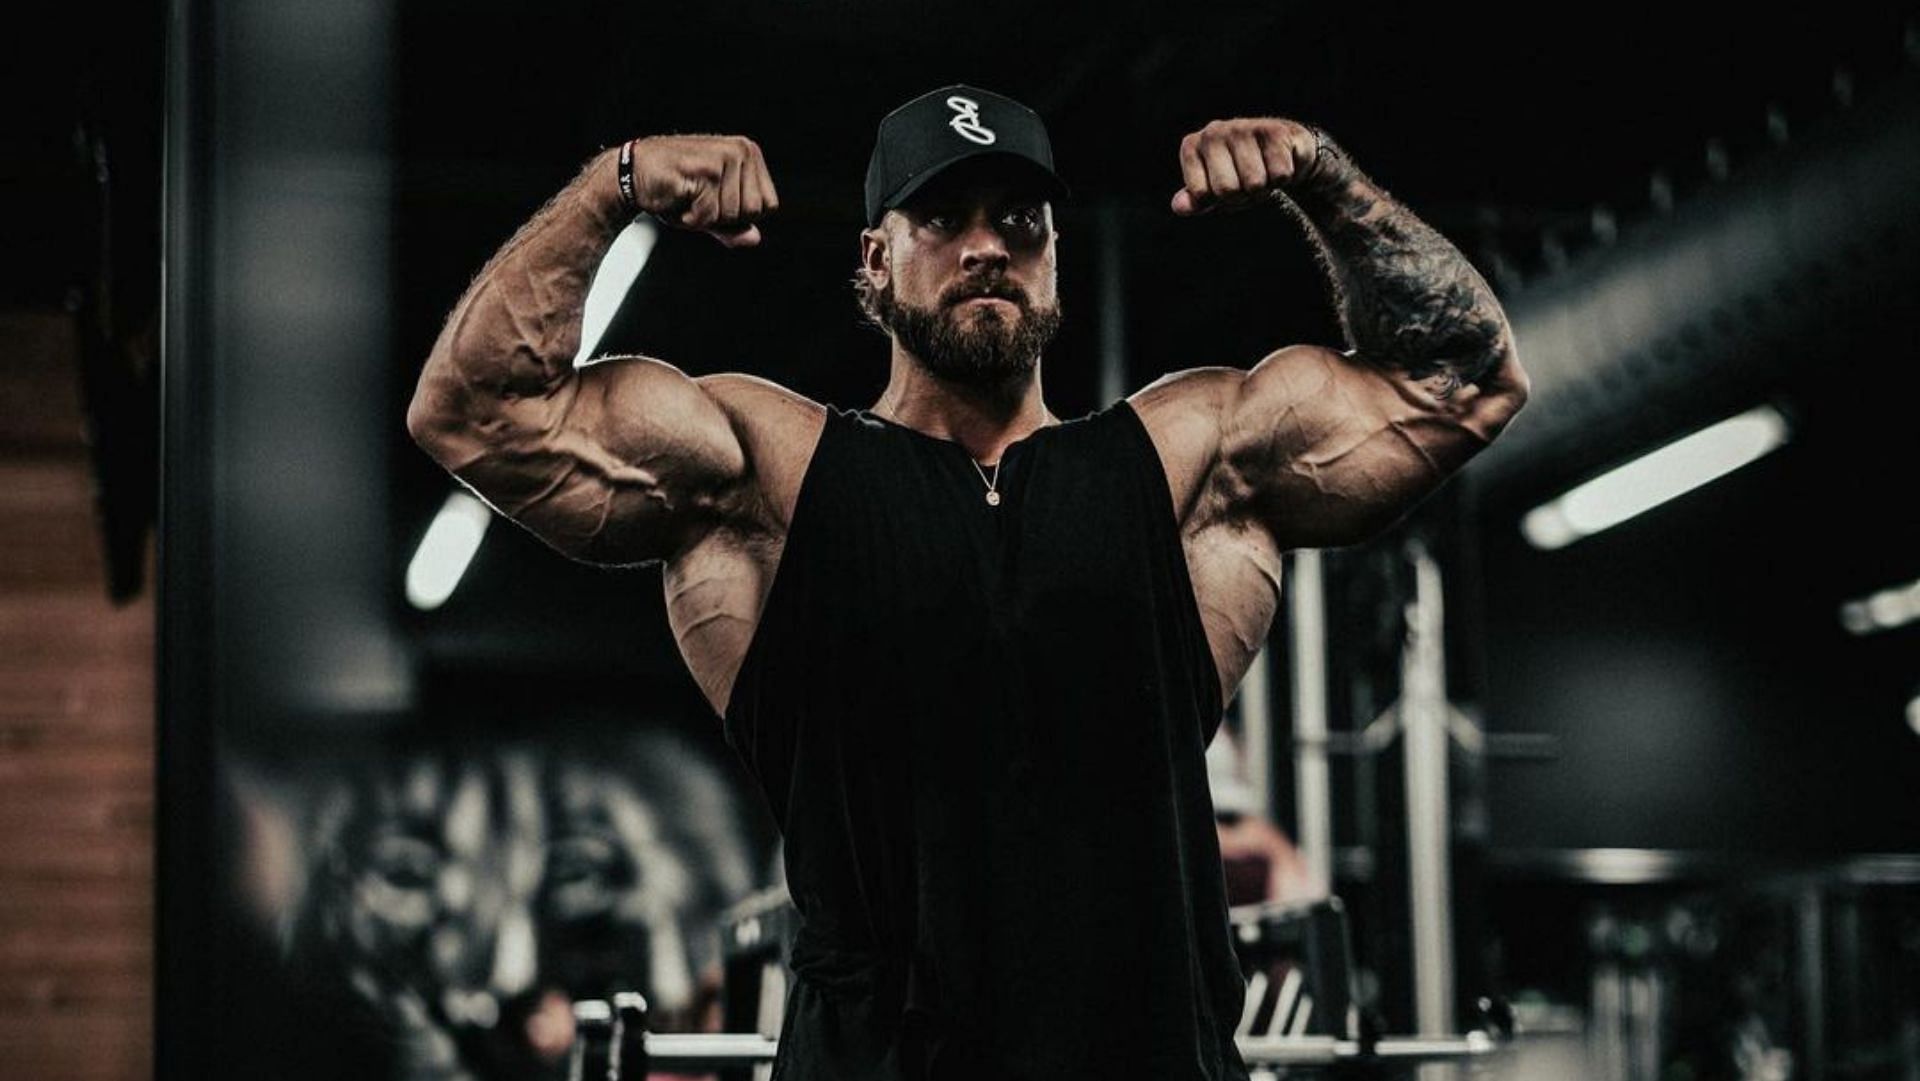 i-ve-decreased-everything-and-look-much-better-chris-bumstead-on-his-current-training-cycle